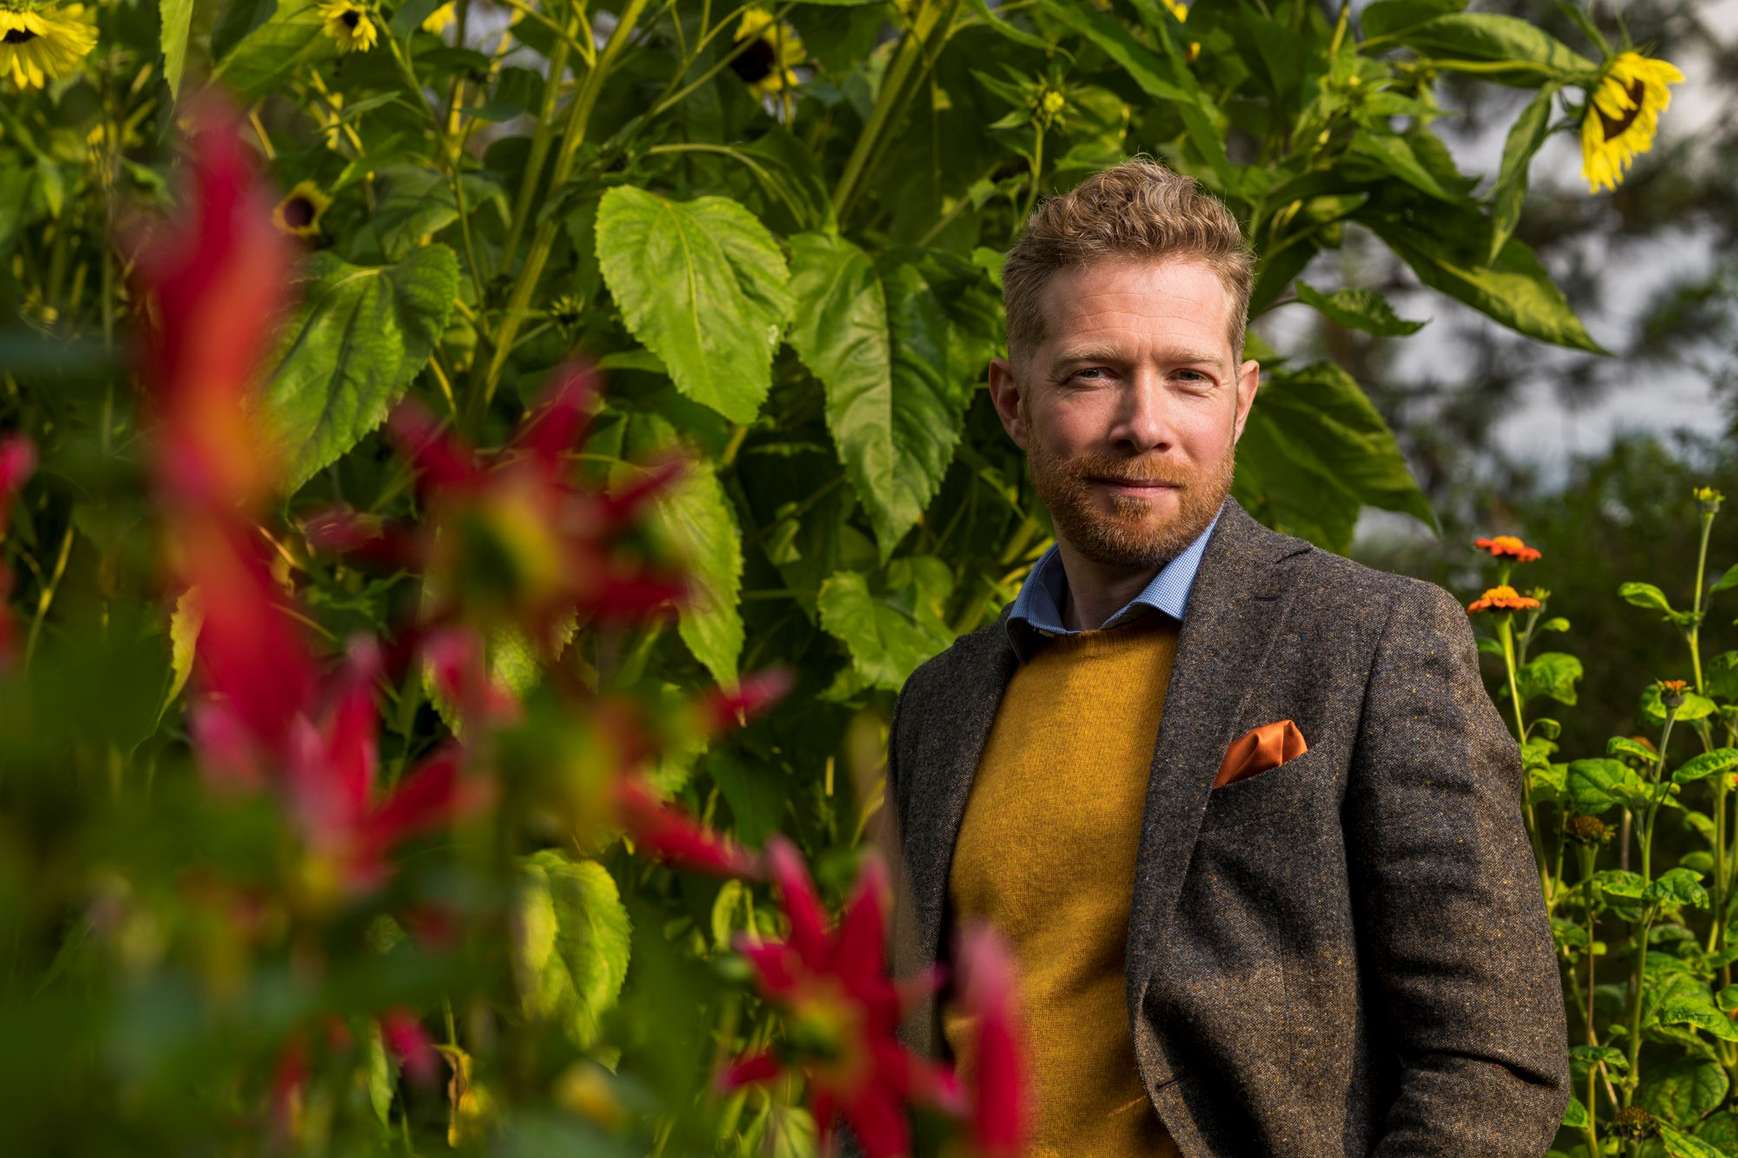 A head and shoulders image of Zeb Soanes standing by some shrubs